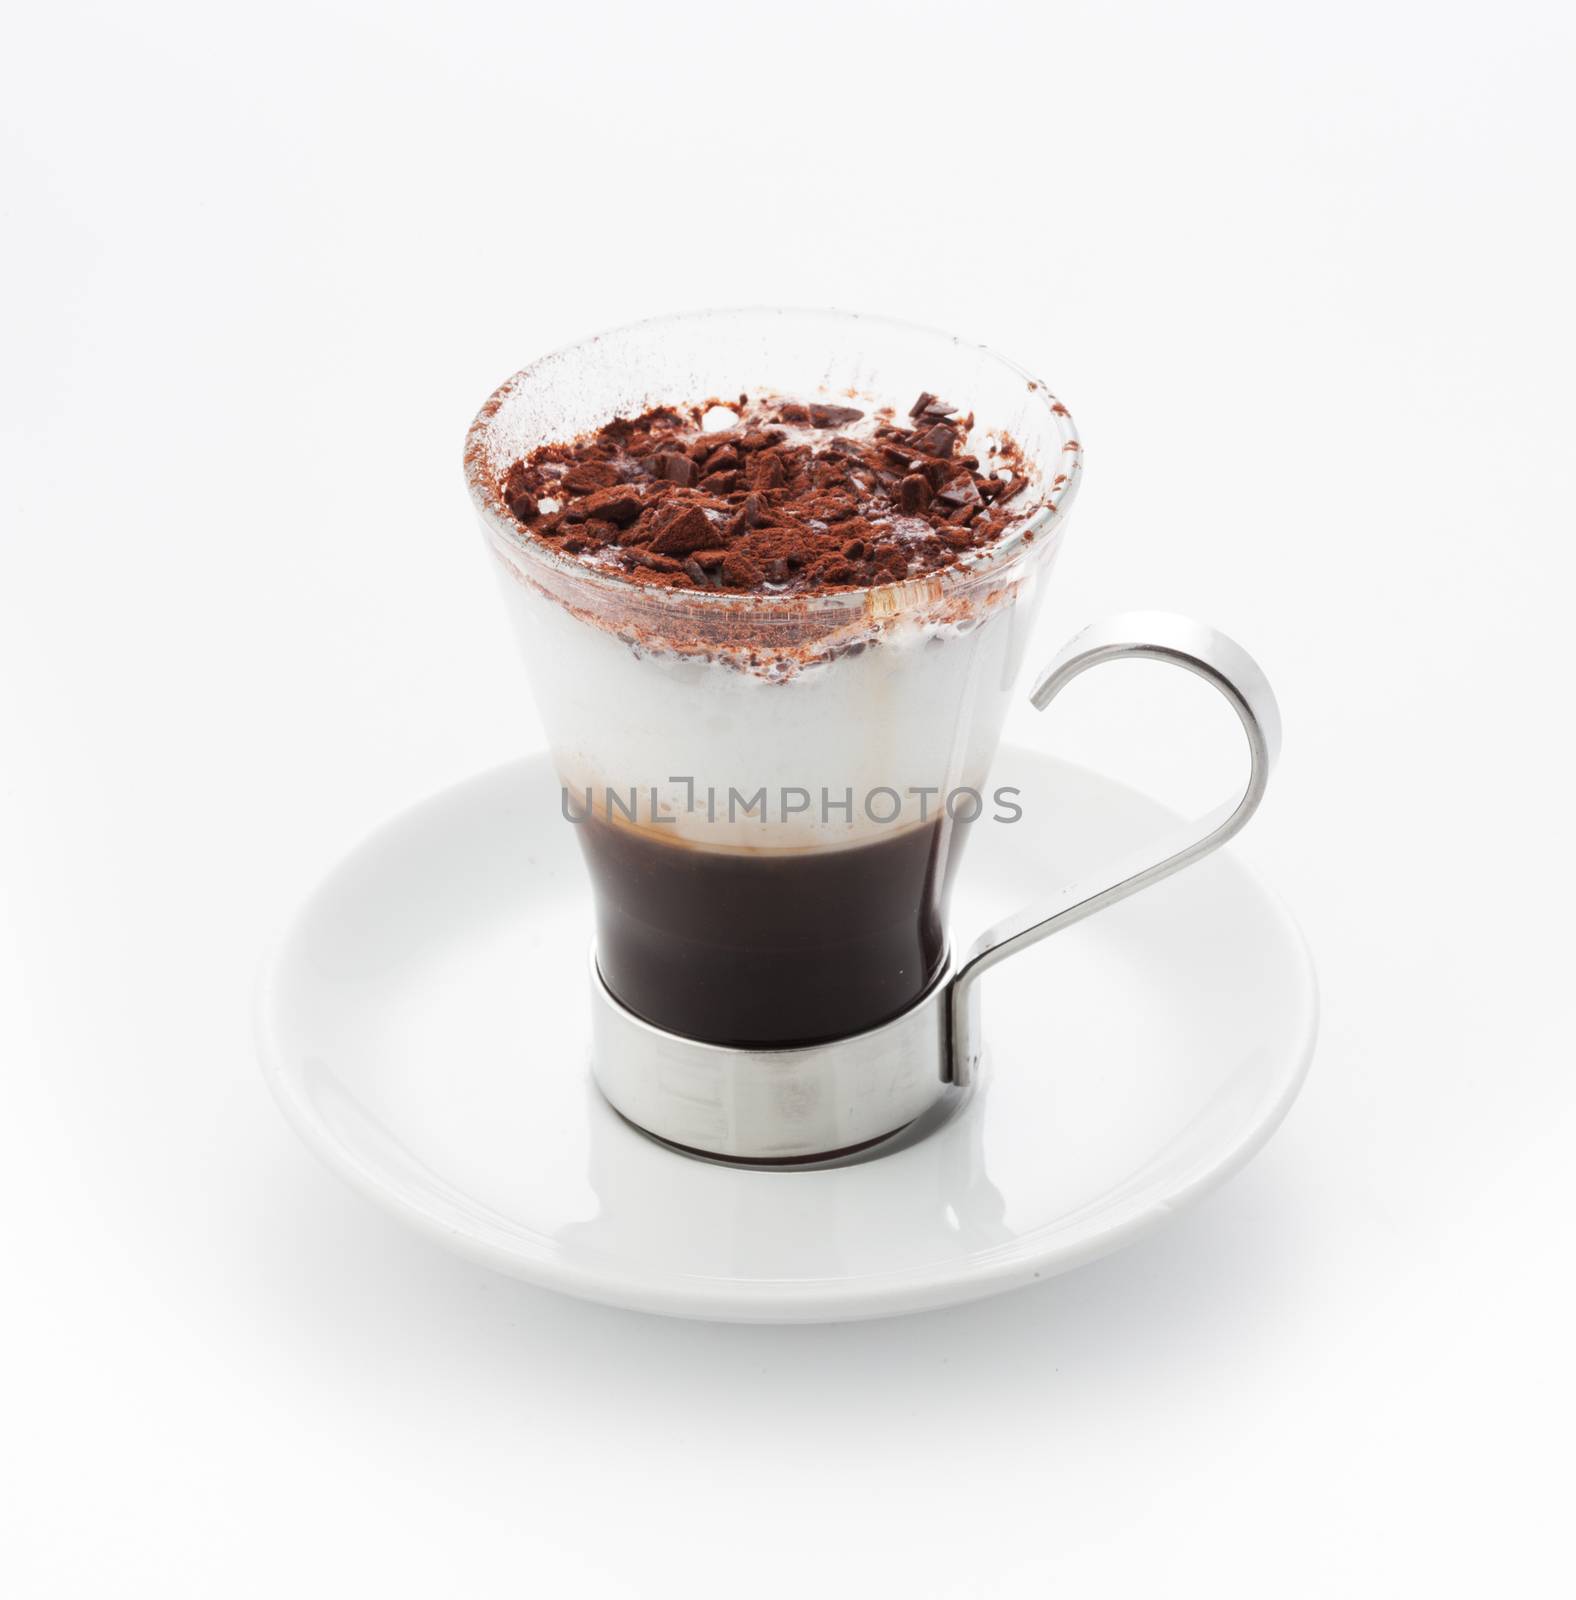 Garnished coffee with cream topping in elegant cup.